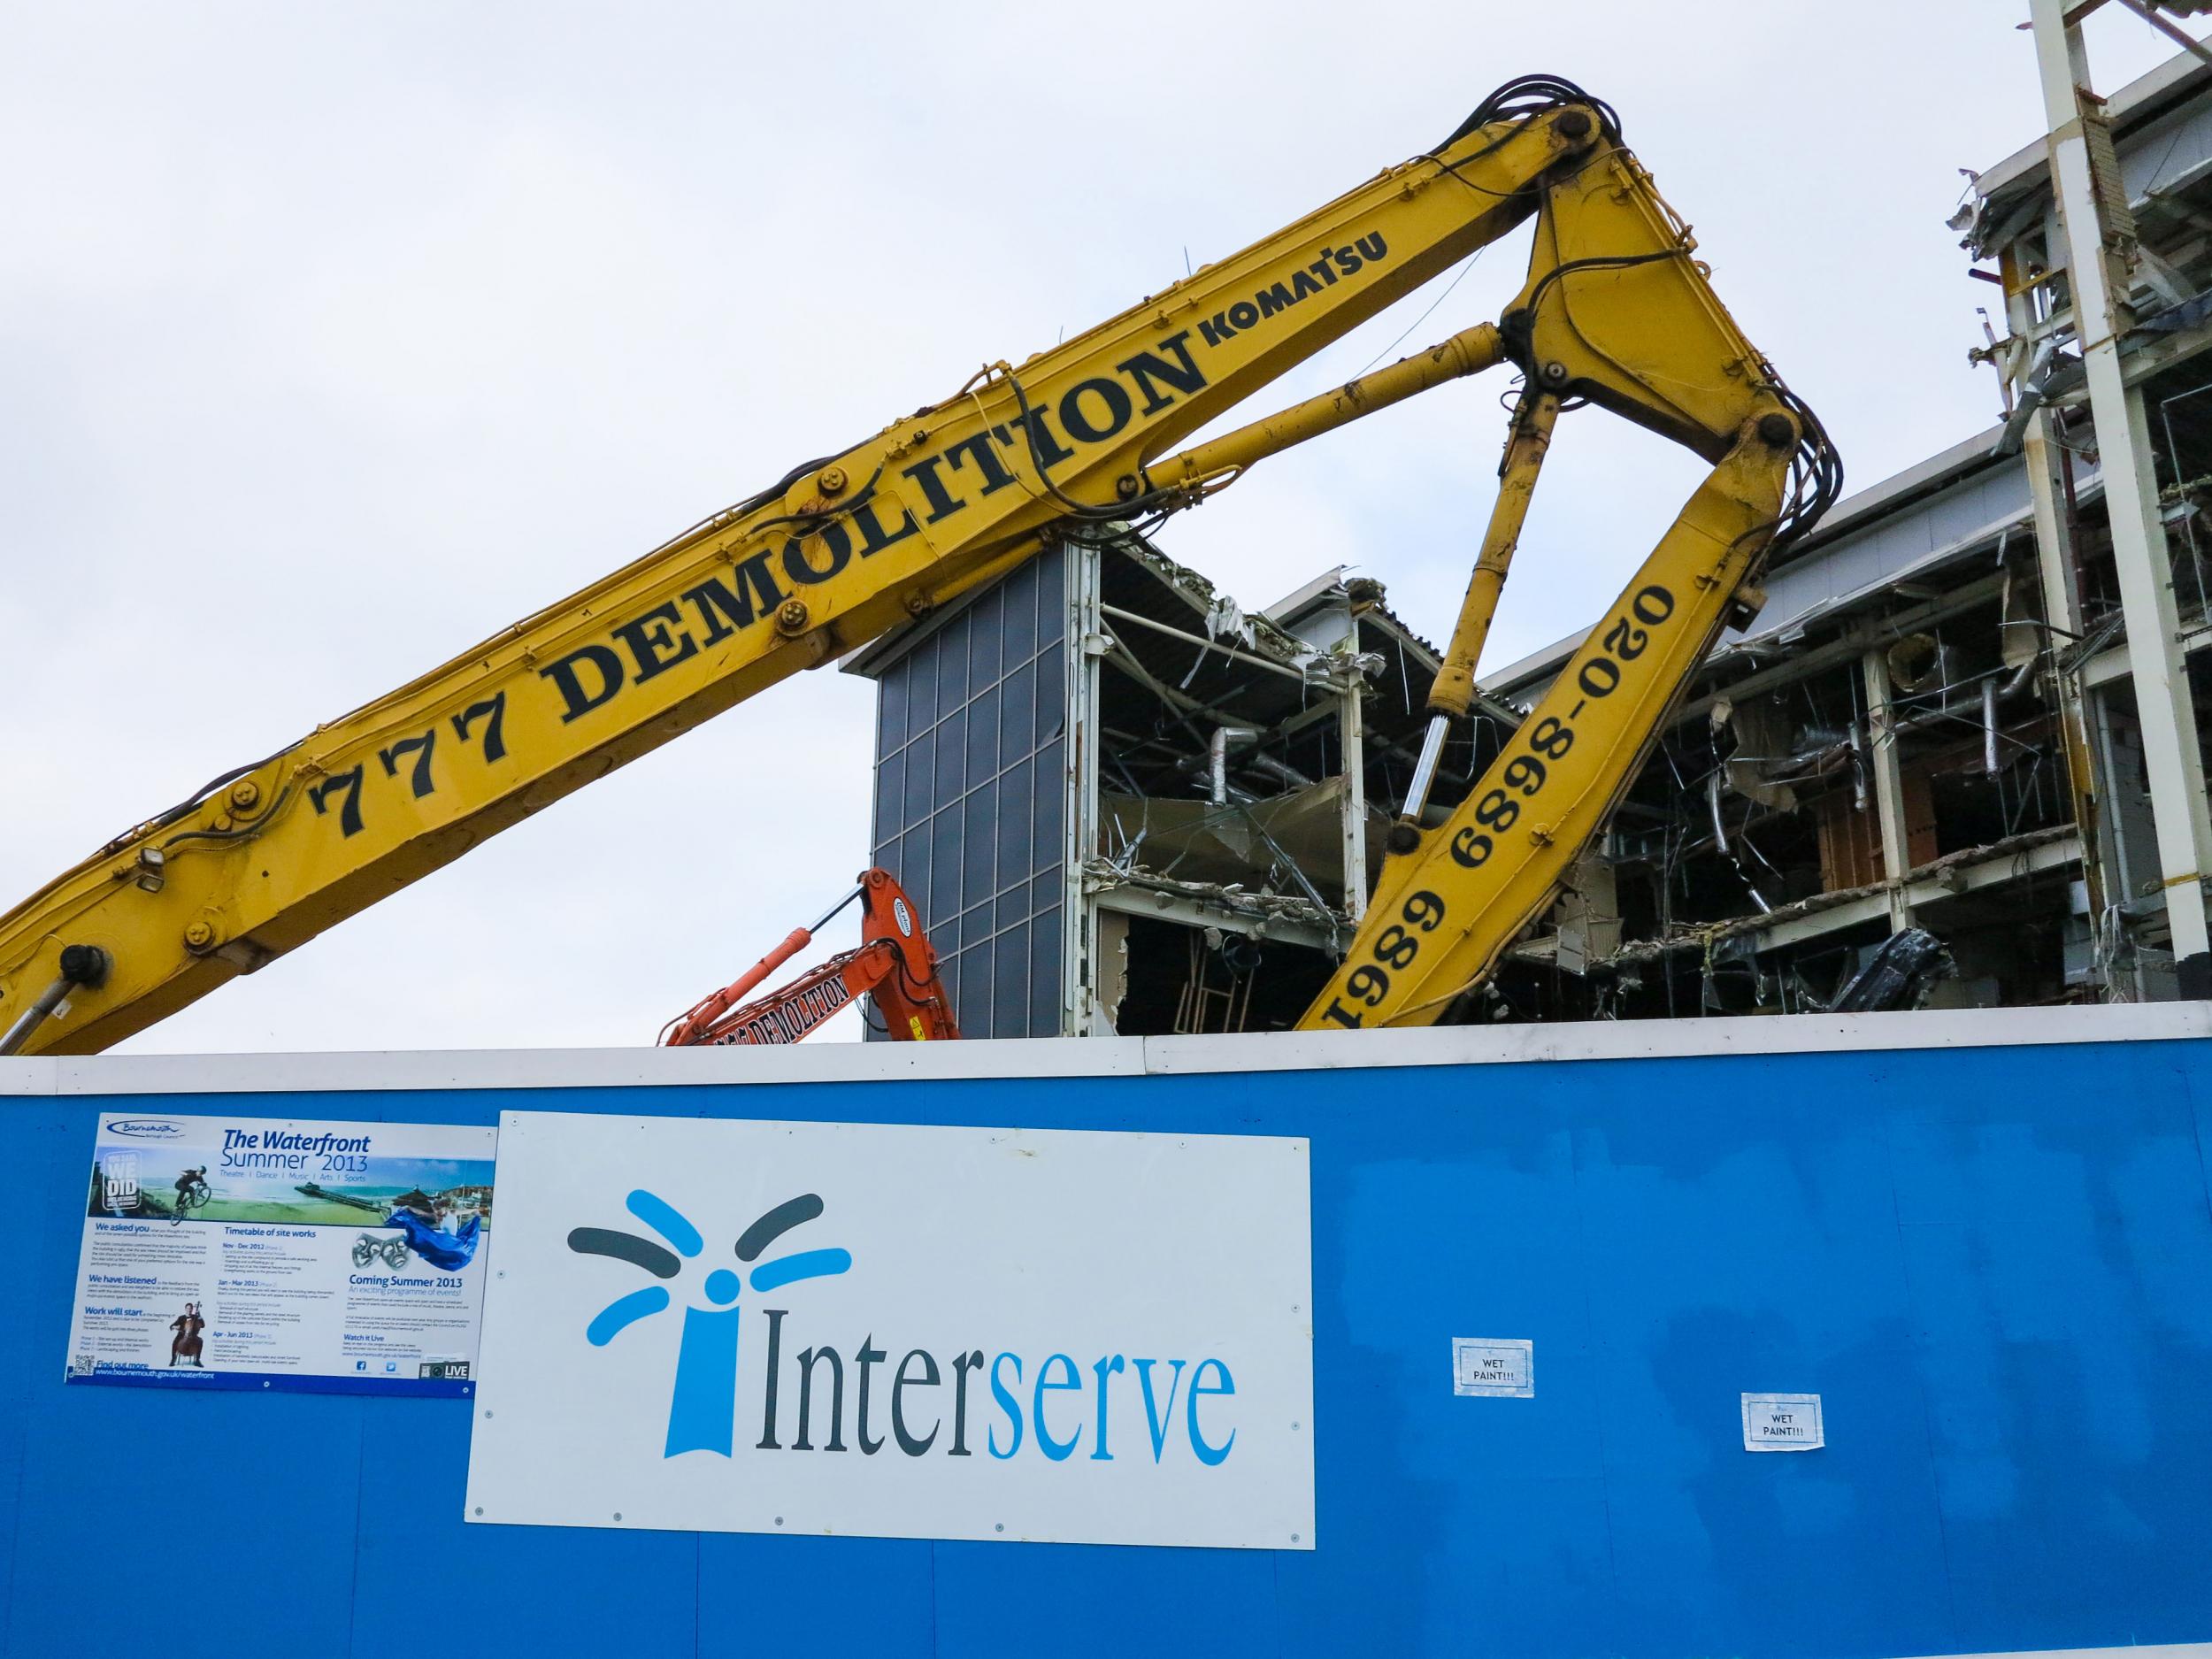 Interserve: The Cabinet Office has sought to reassure over the contractor's financial health